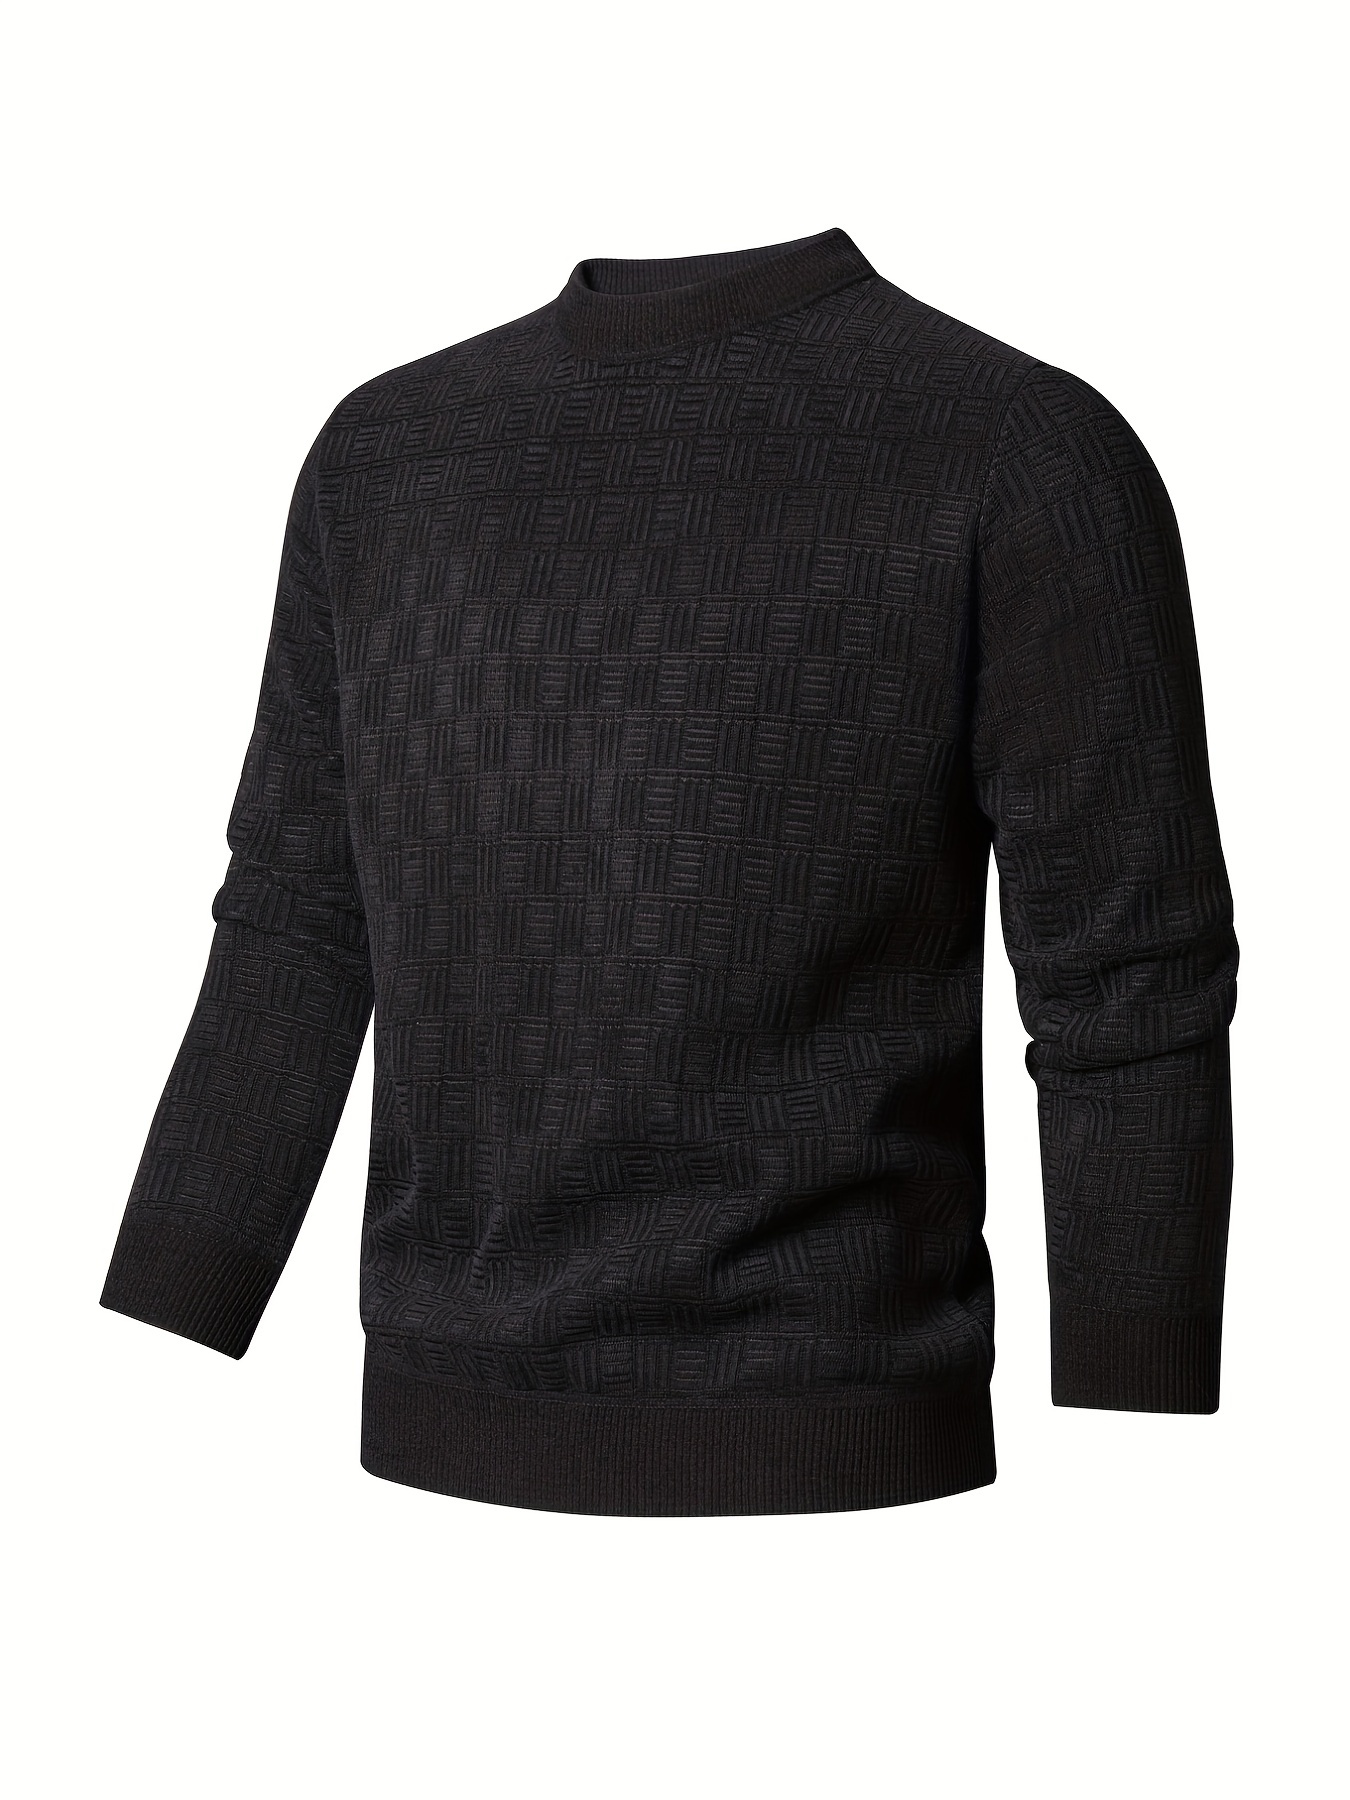 Louis Vuitton Crew Neck Regular Size Sweaters for Men for sale